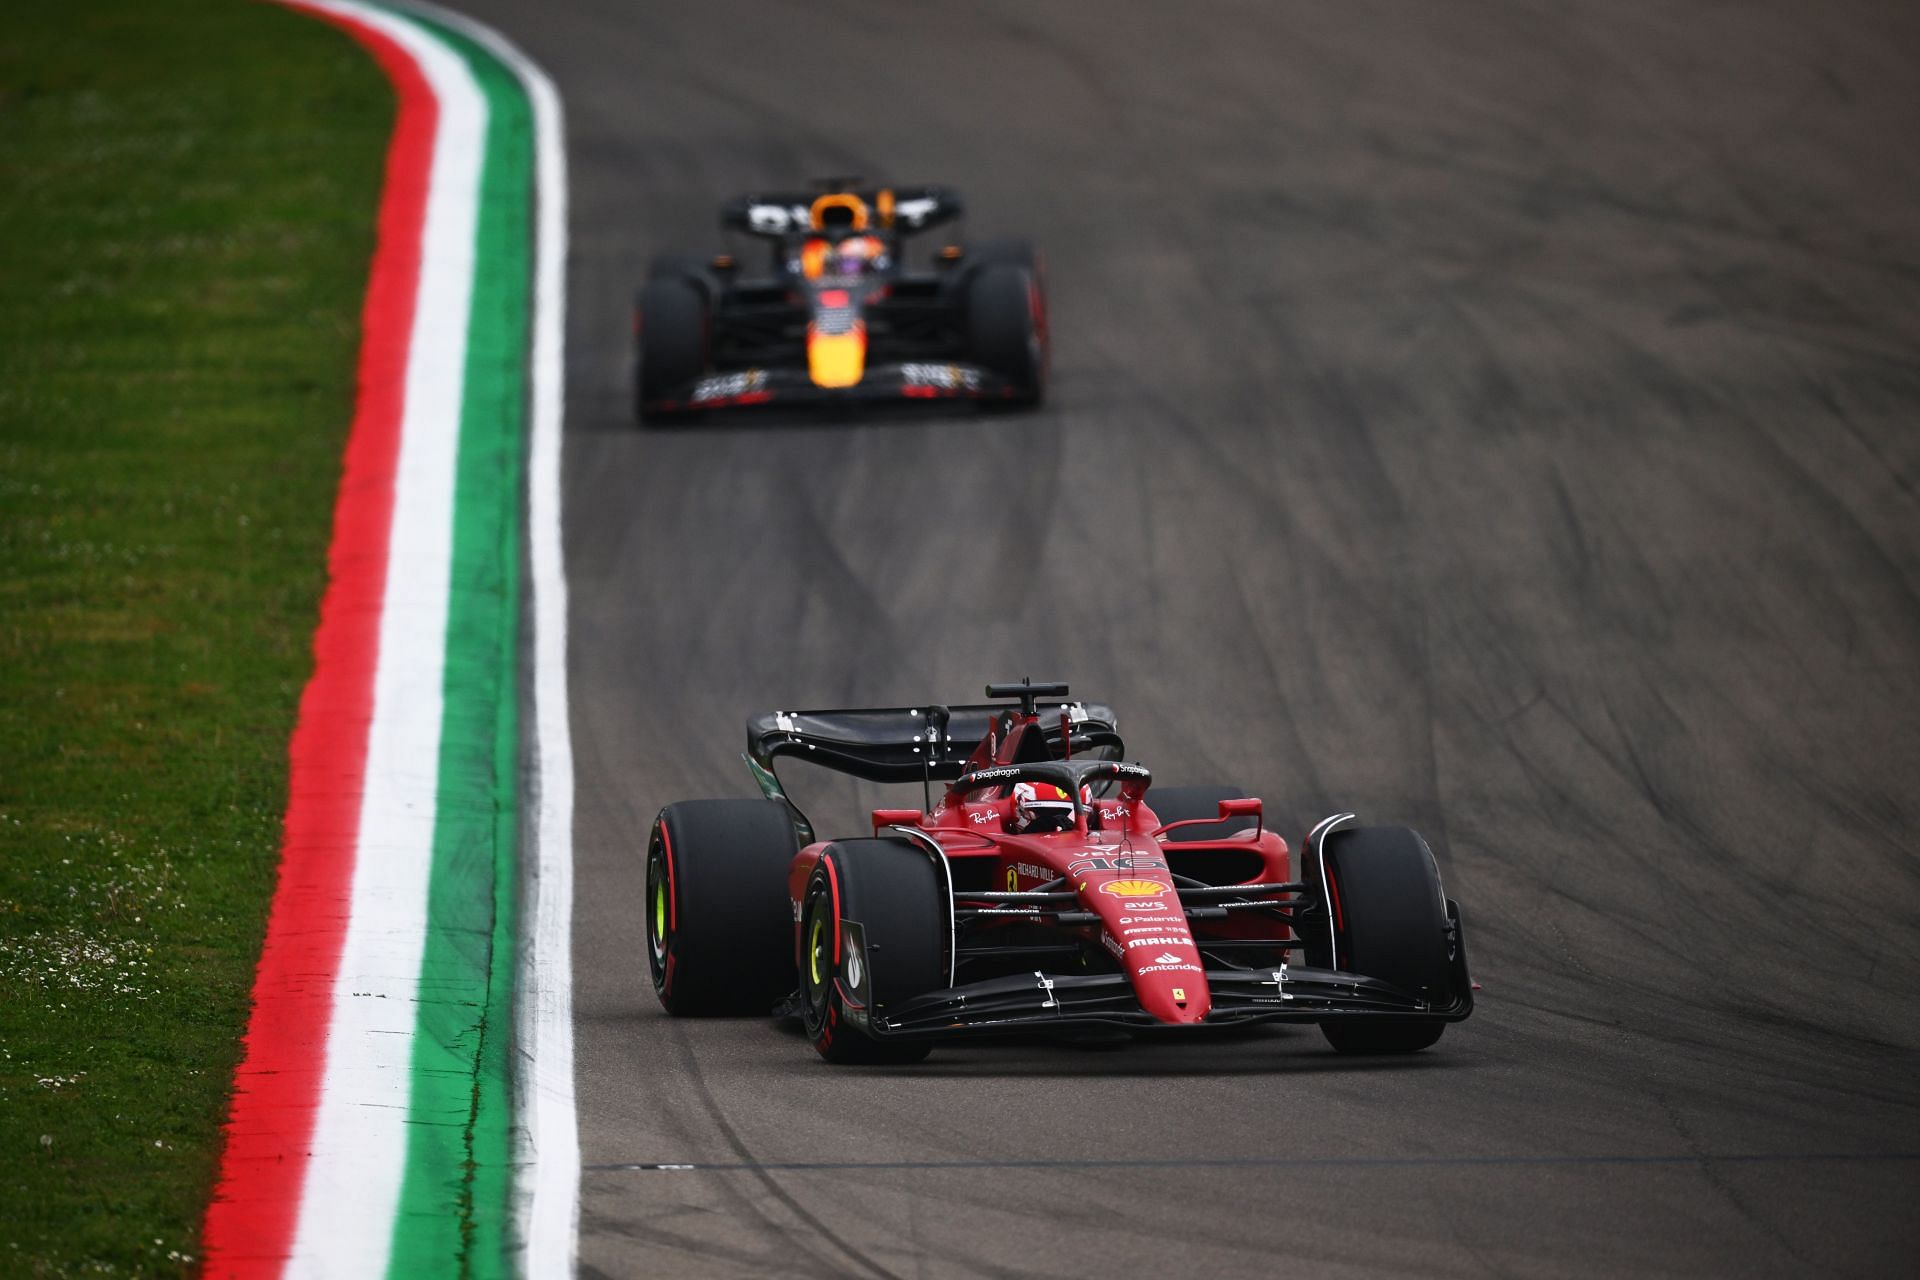 F1 Grand Prix of Emilia Romagna - Sprint - Max Verstappen lines up behind Charles Leclerc at Imola